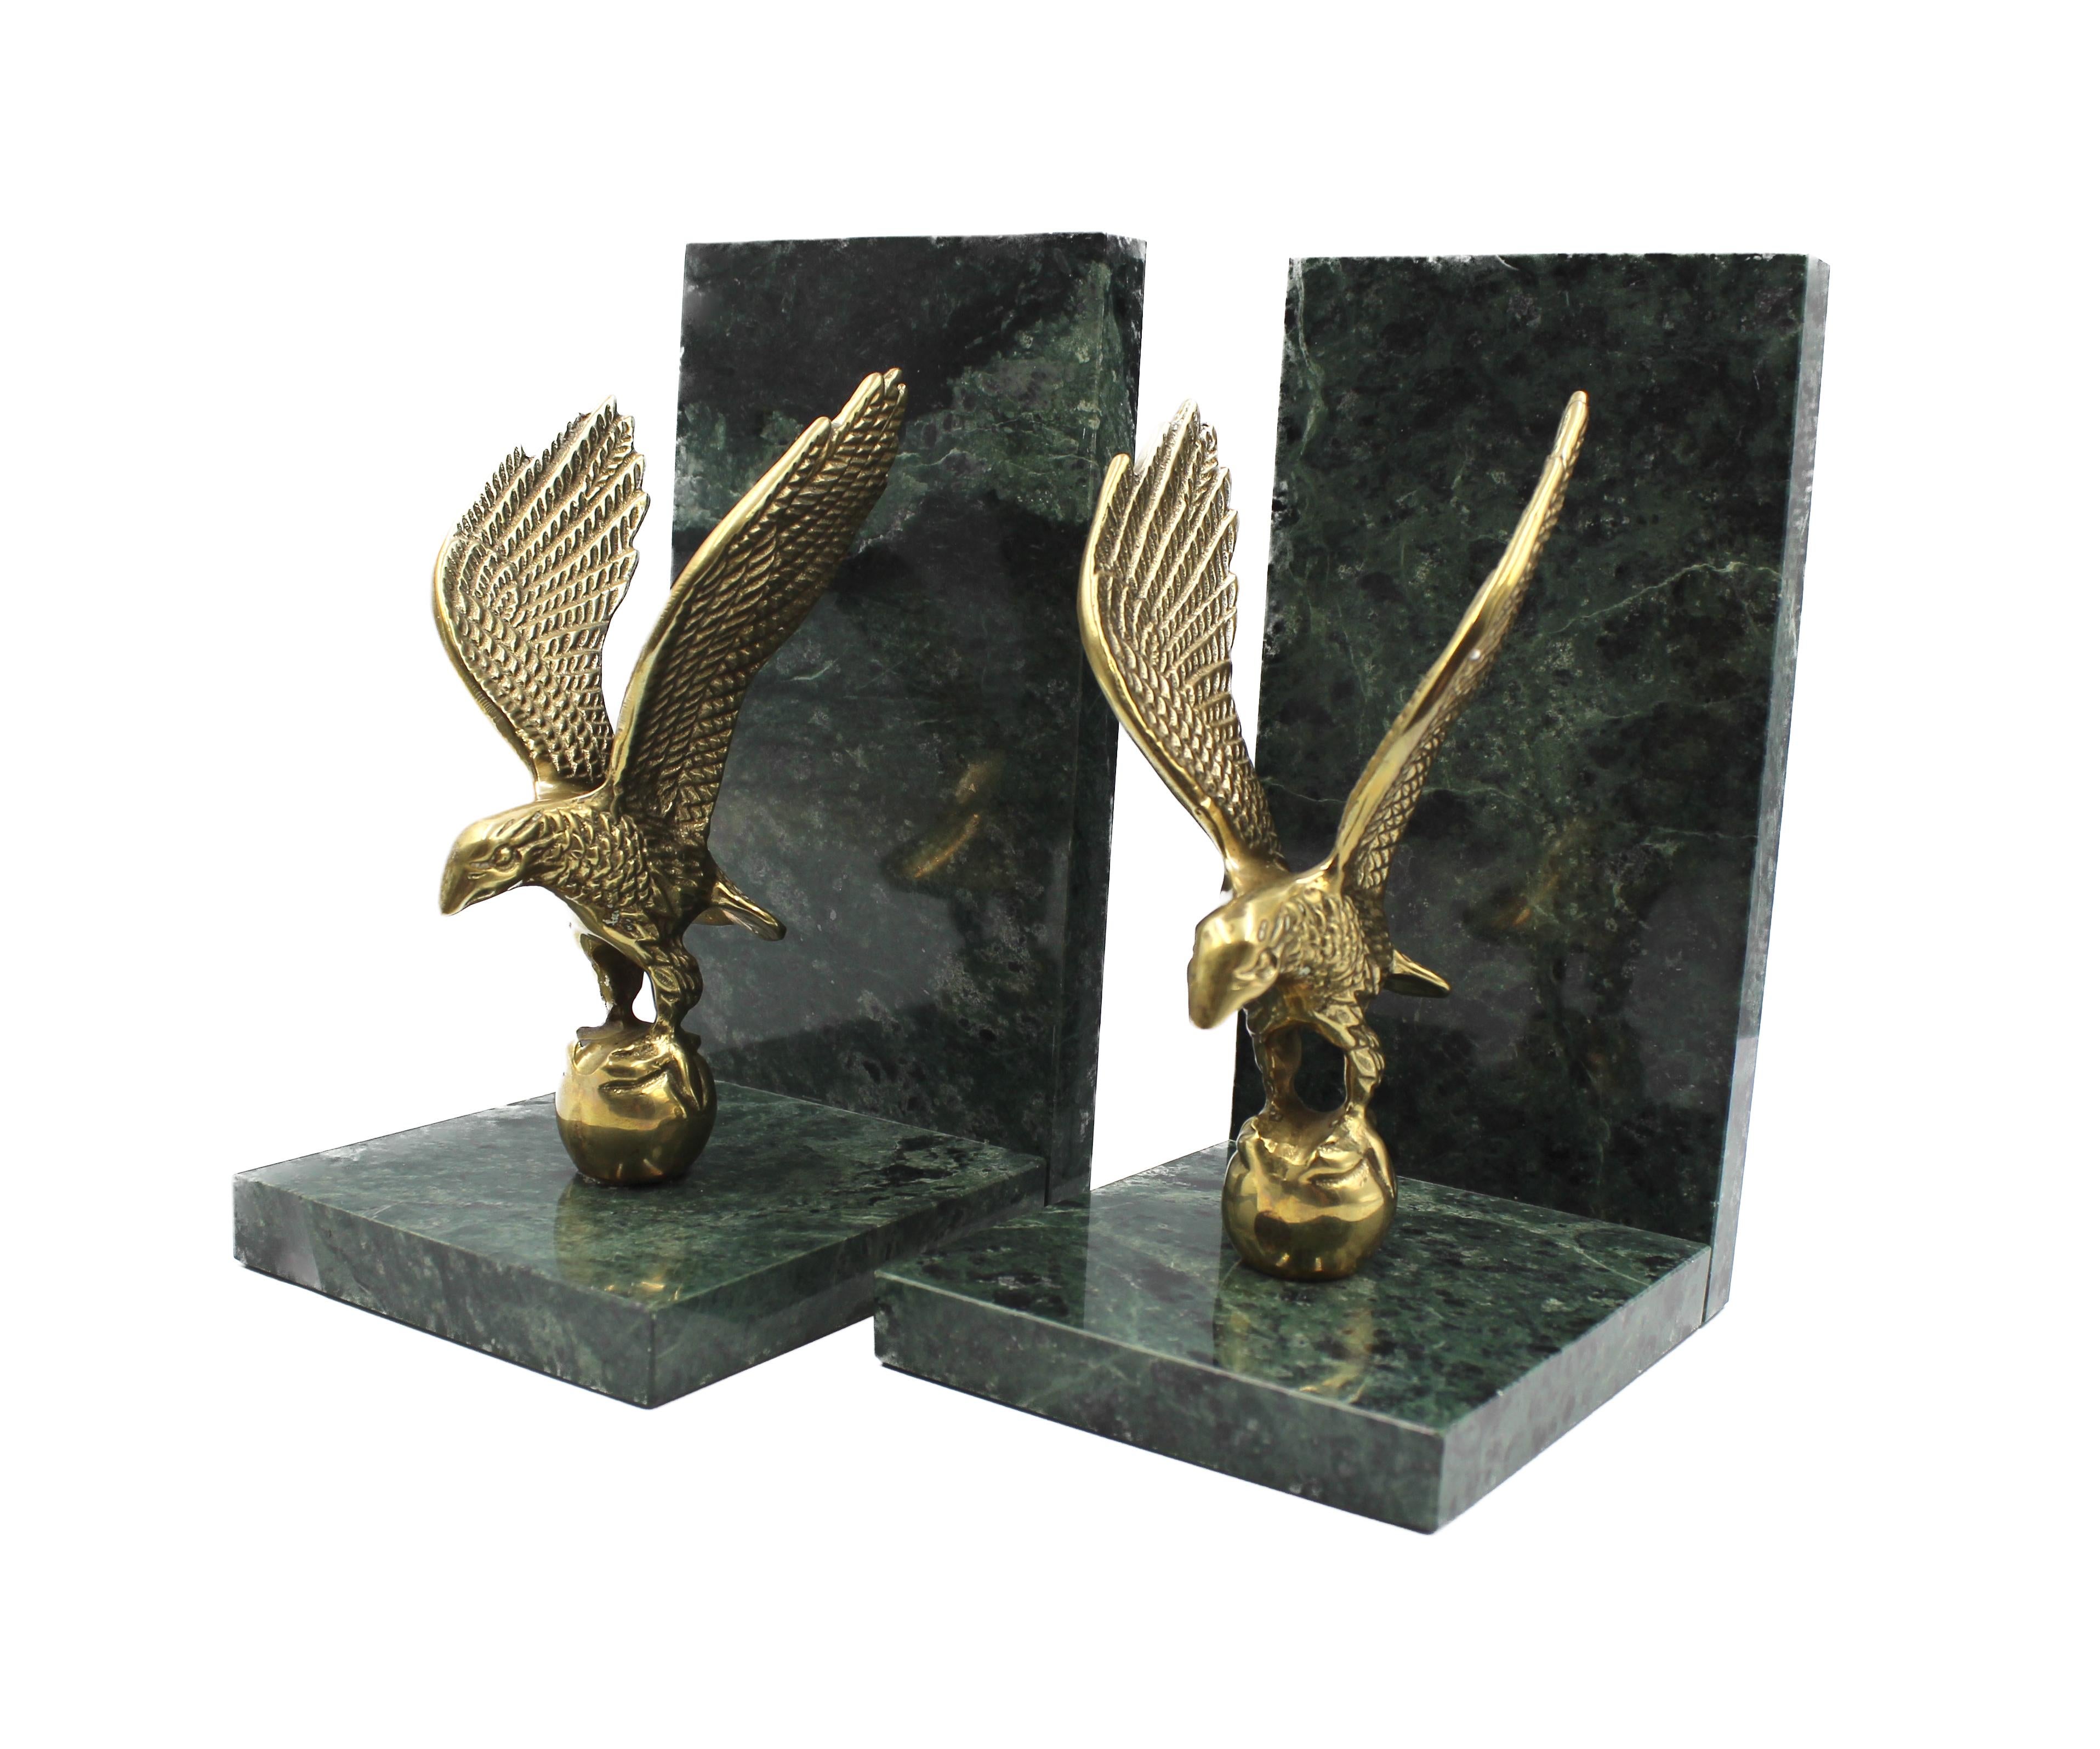 This is a vintage pair of eagle bookends, dating to the early 20th century. The bookends feature brass eagles affixed to green marble bases. The eagles appear to be in mid-flight, with widely spread and open wings that arch upwards. The eagles'